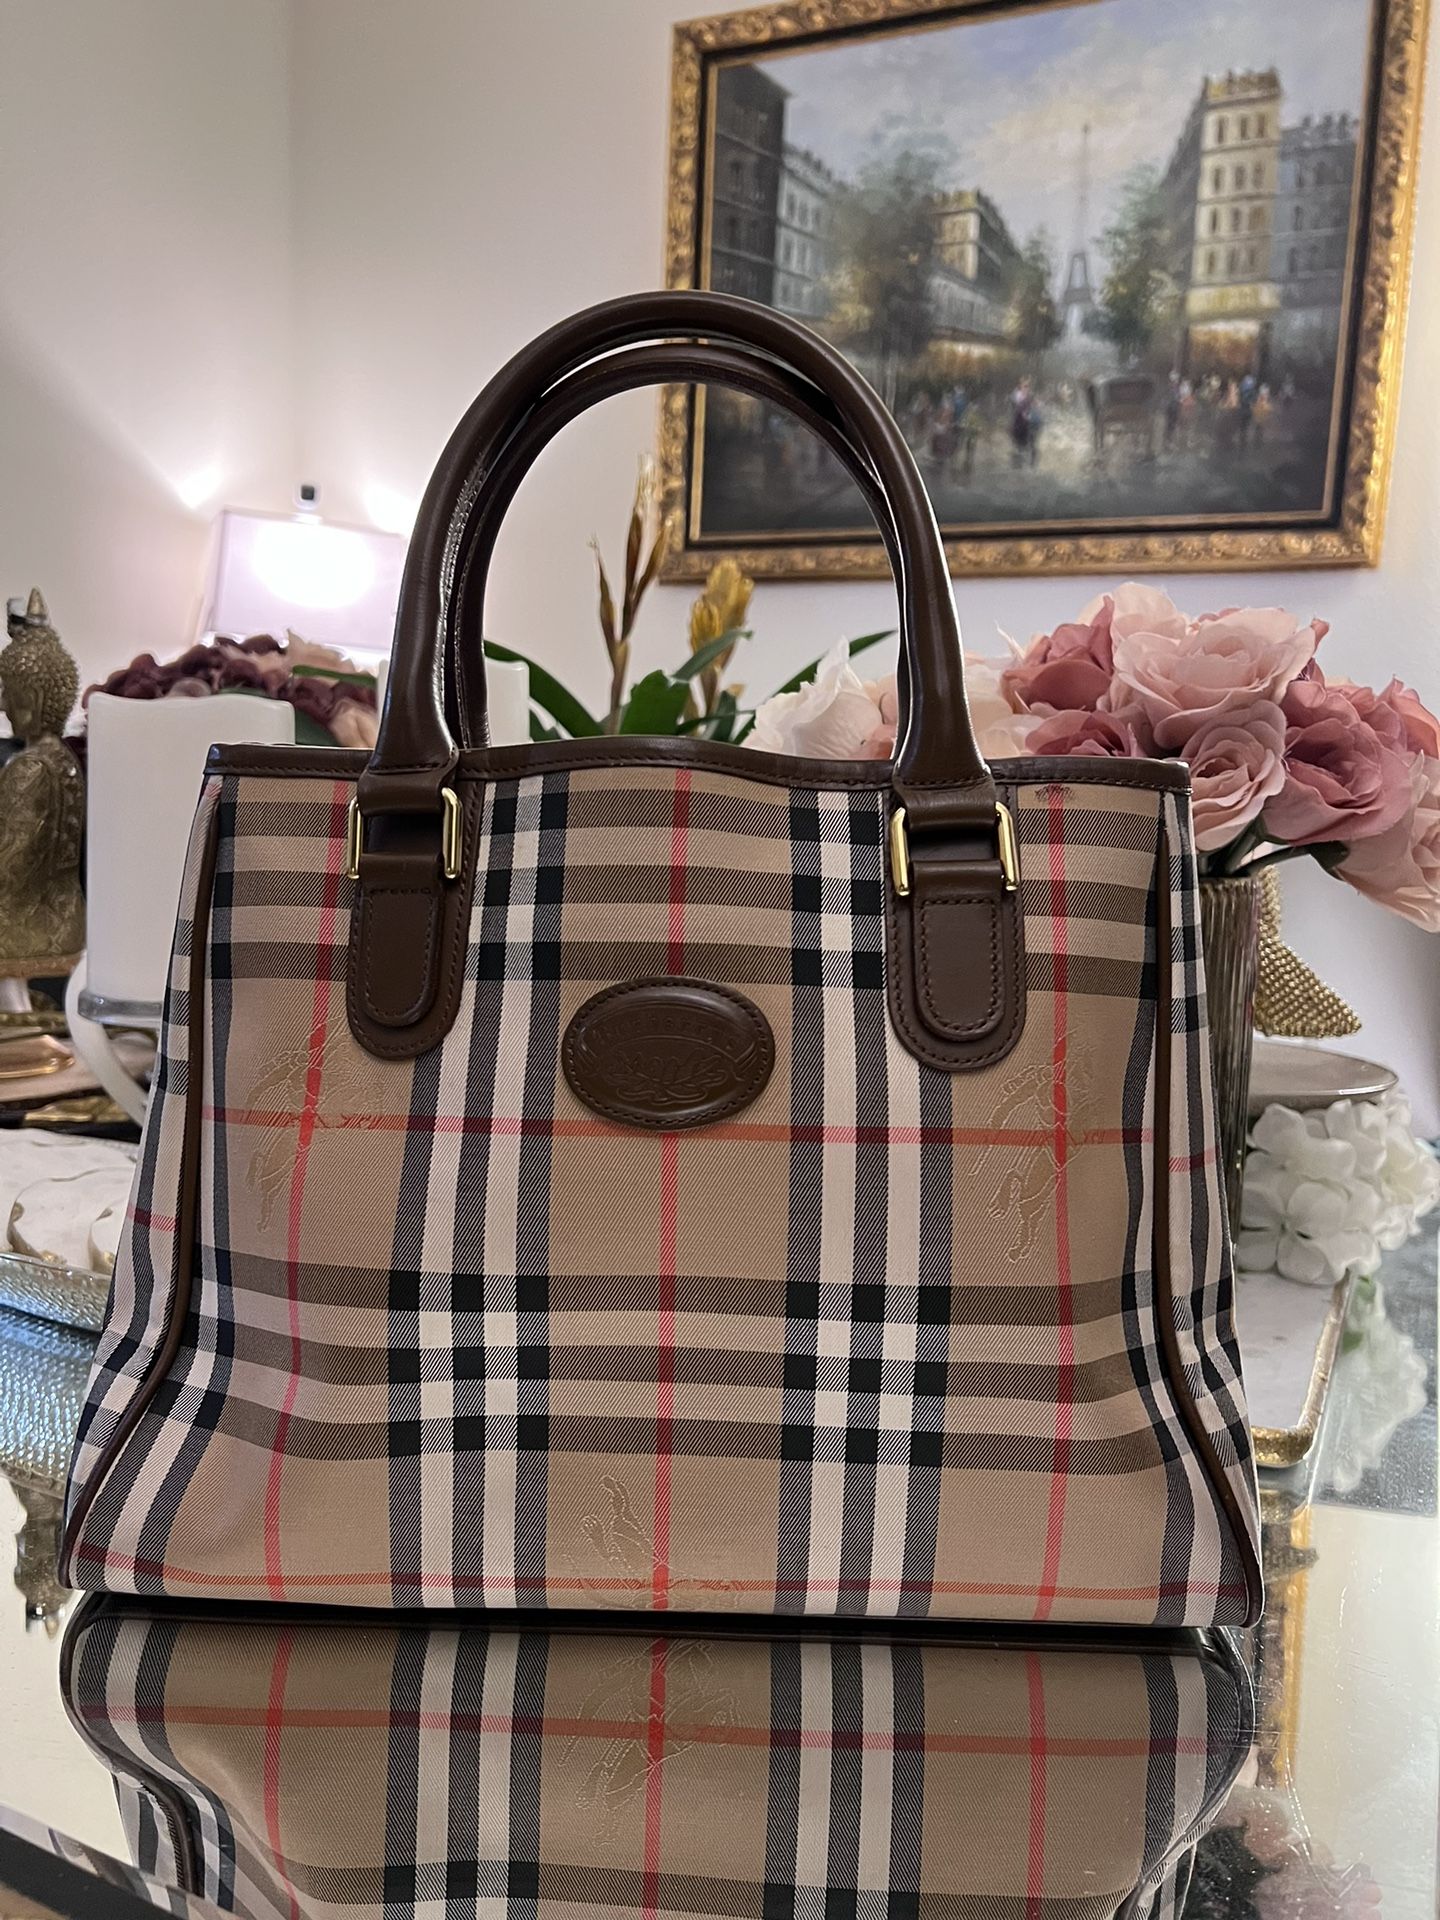 💯 AUTHENTIC Burberry House Check Tote Bag